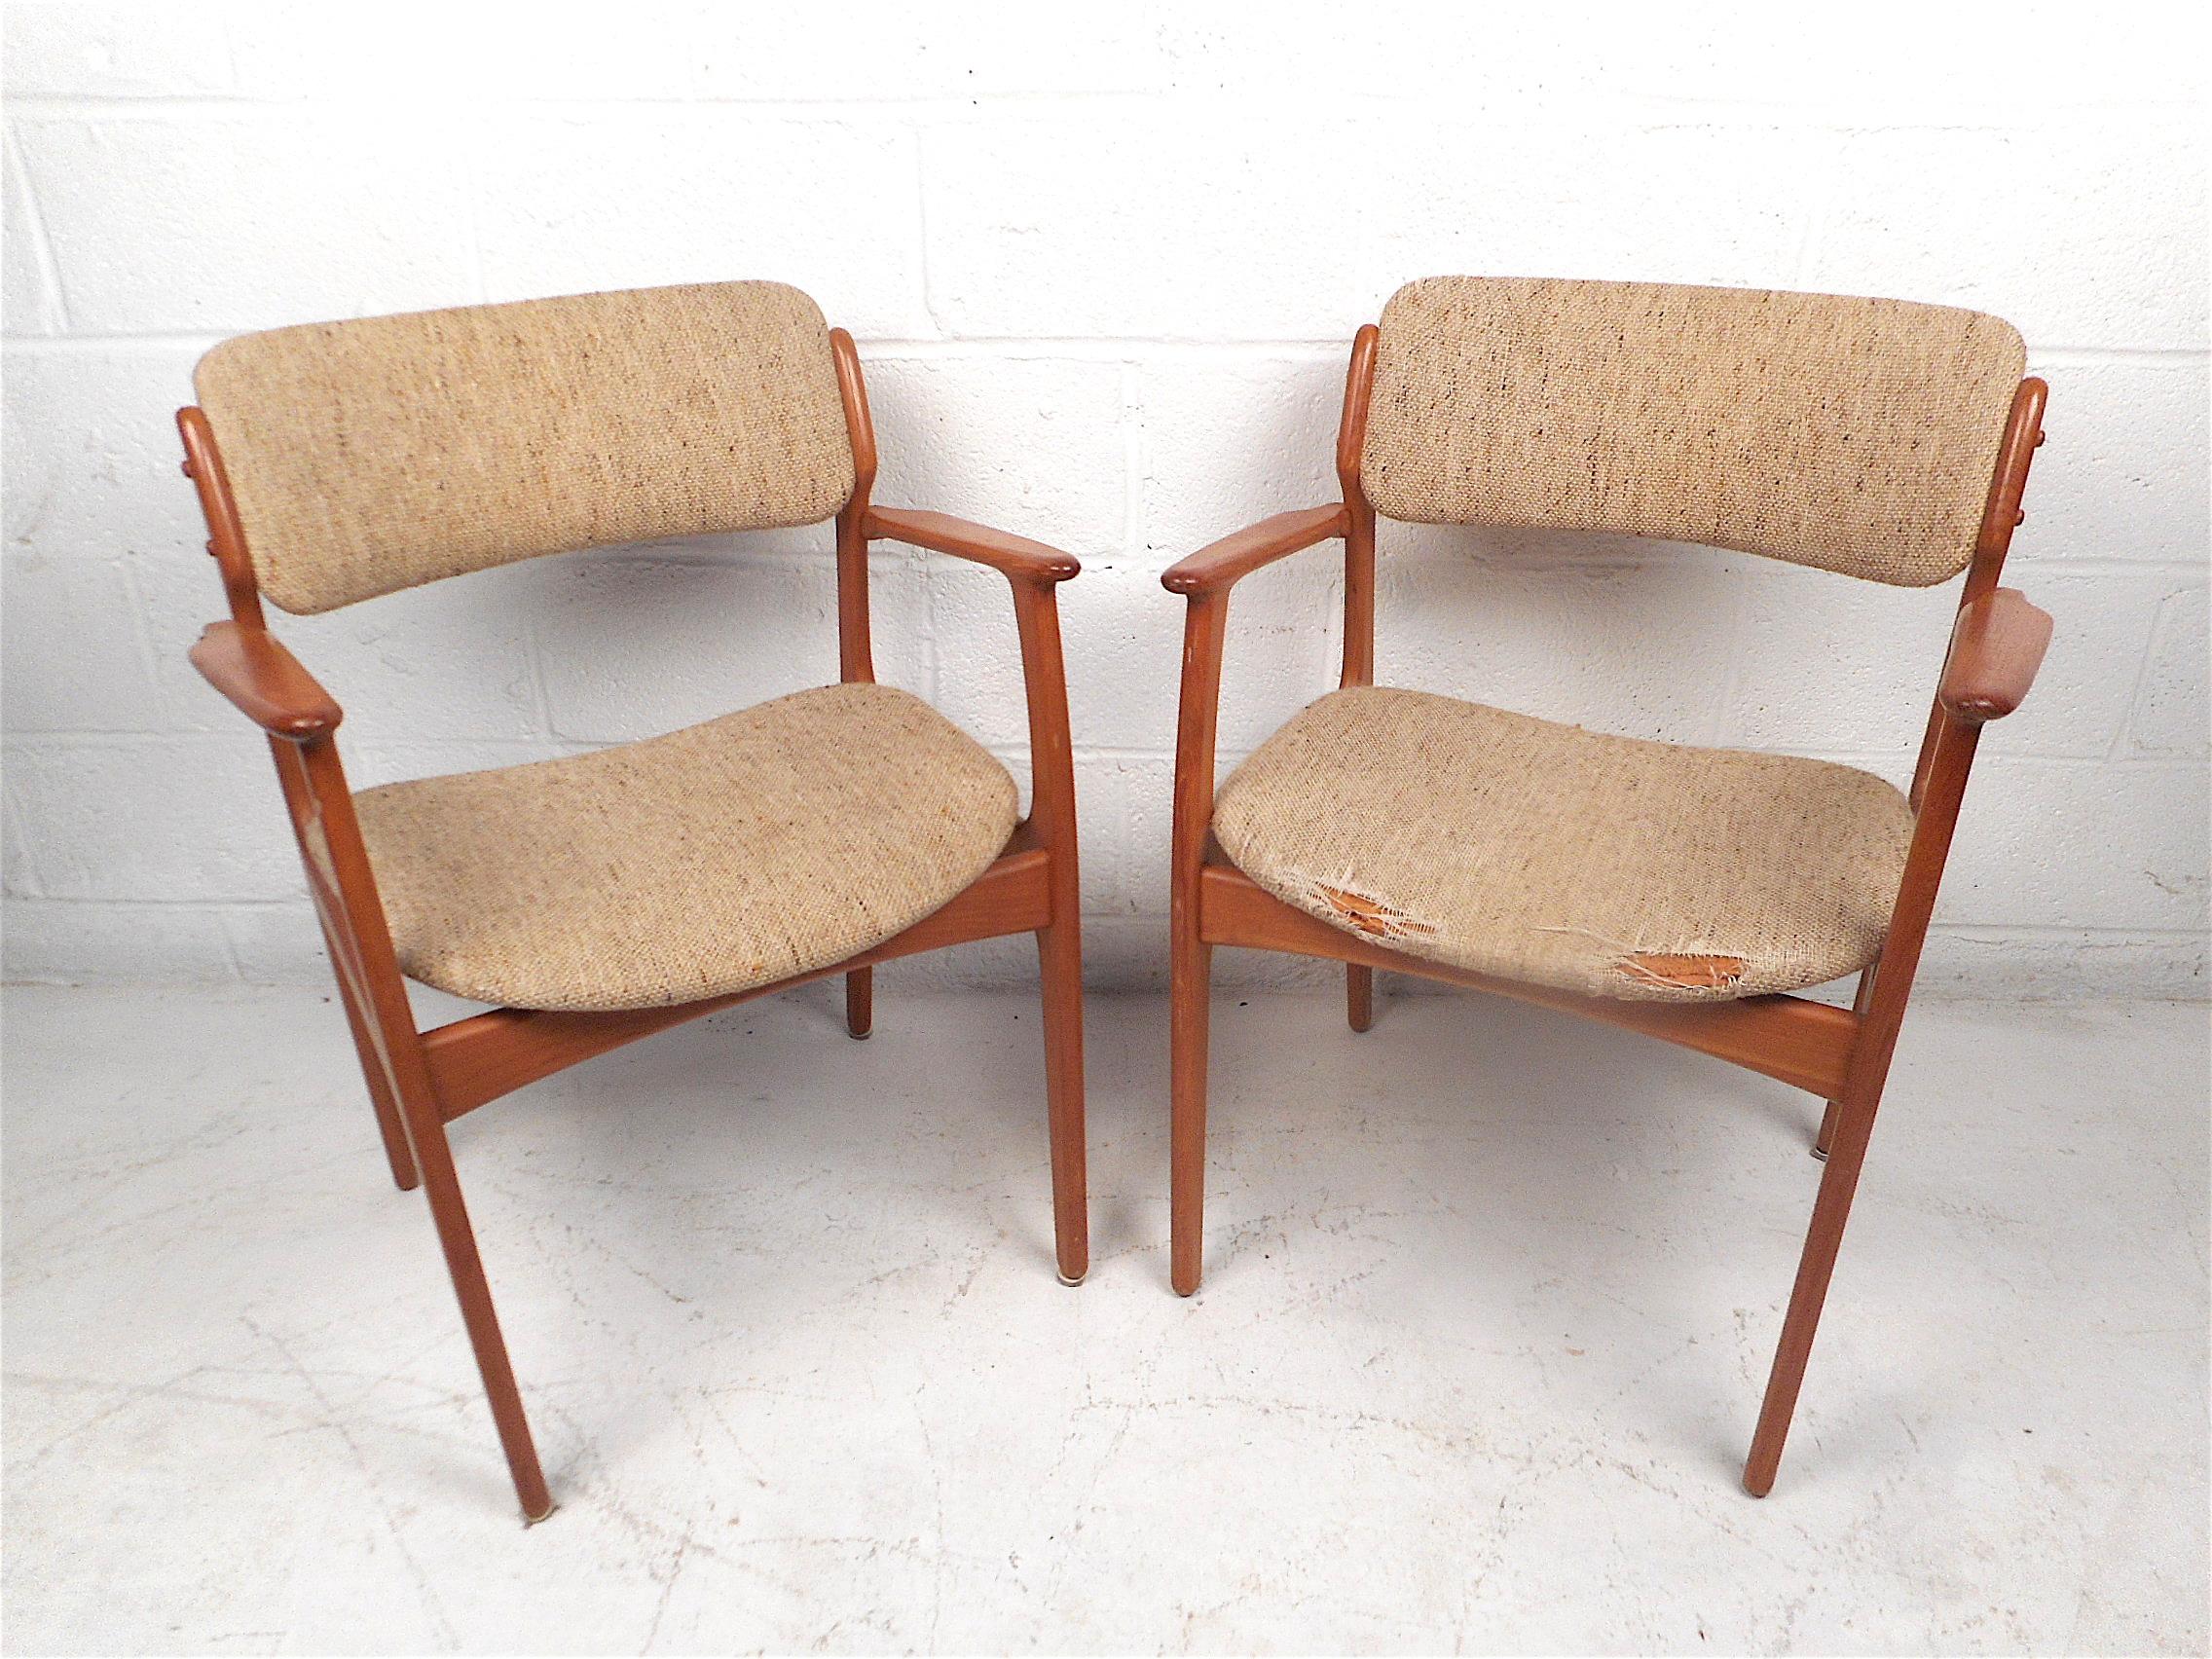 Pair of Danish modern armchairs designed by Erik Buch for O.D. Mobler, circa 1960s. Beautiful chairs with sculpted armrests and a sleek angular frame. These chairs are sure to make a striking addition to any modern interior. Please confirm item